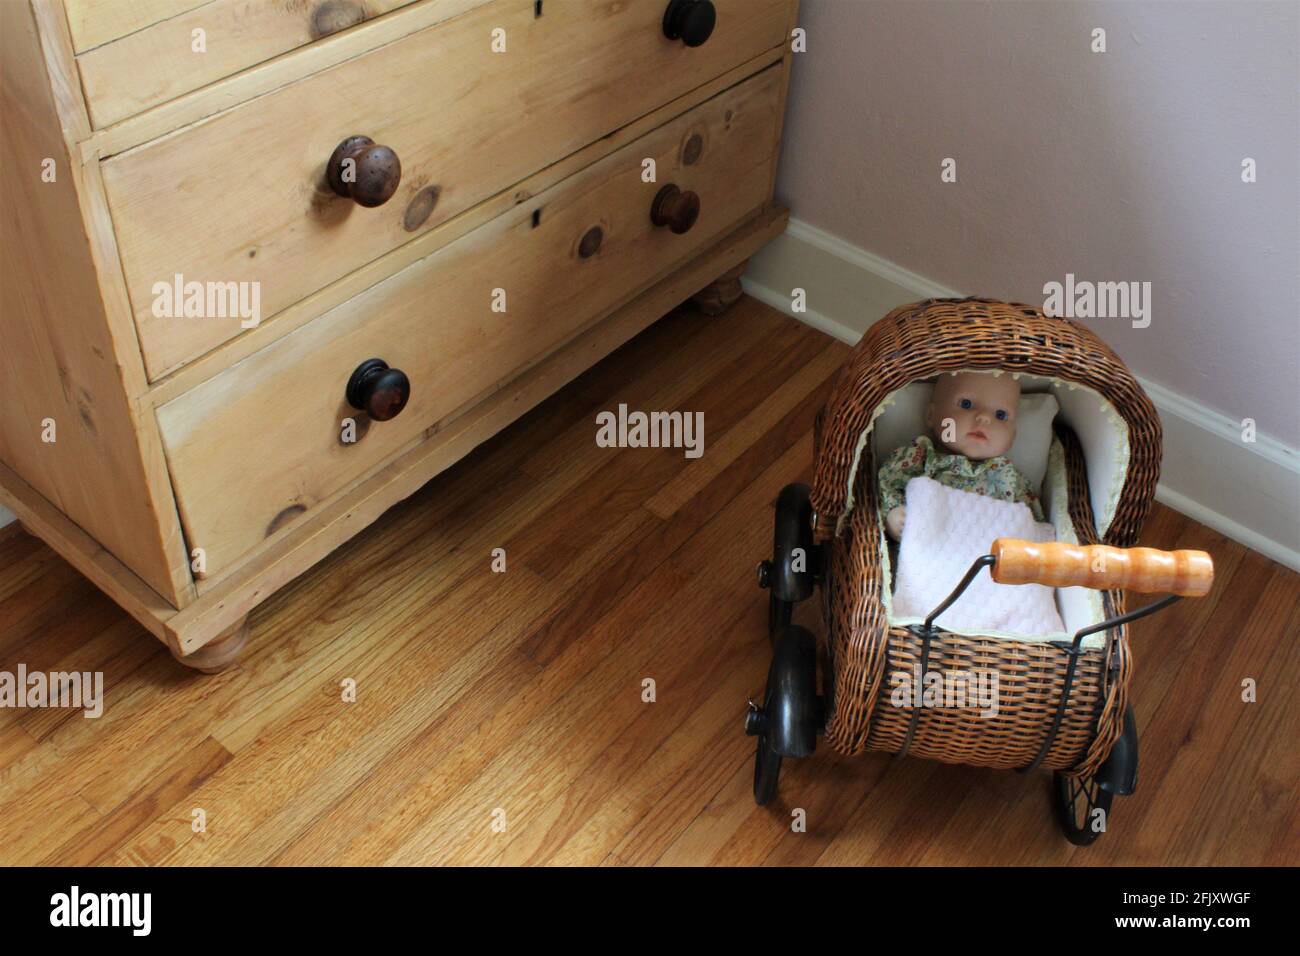 Small woven baby carriage with fake baby inside a play room with wooden floors and cabinets. Stock Photo